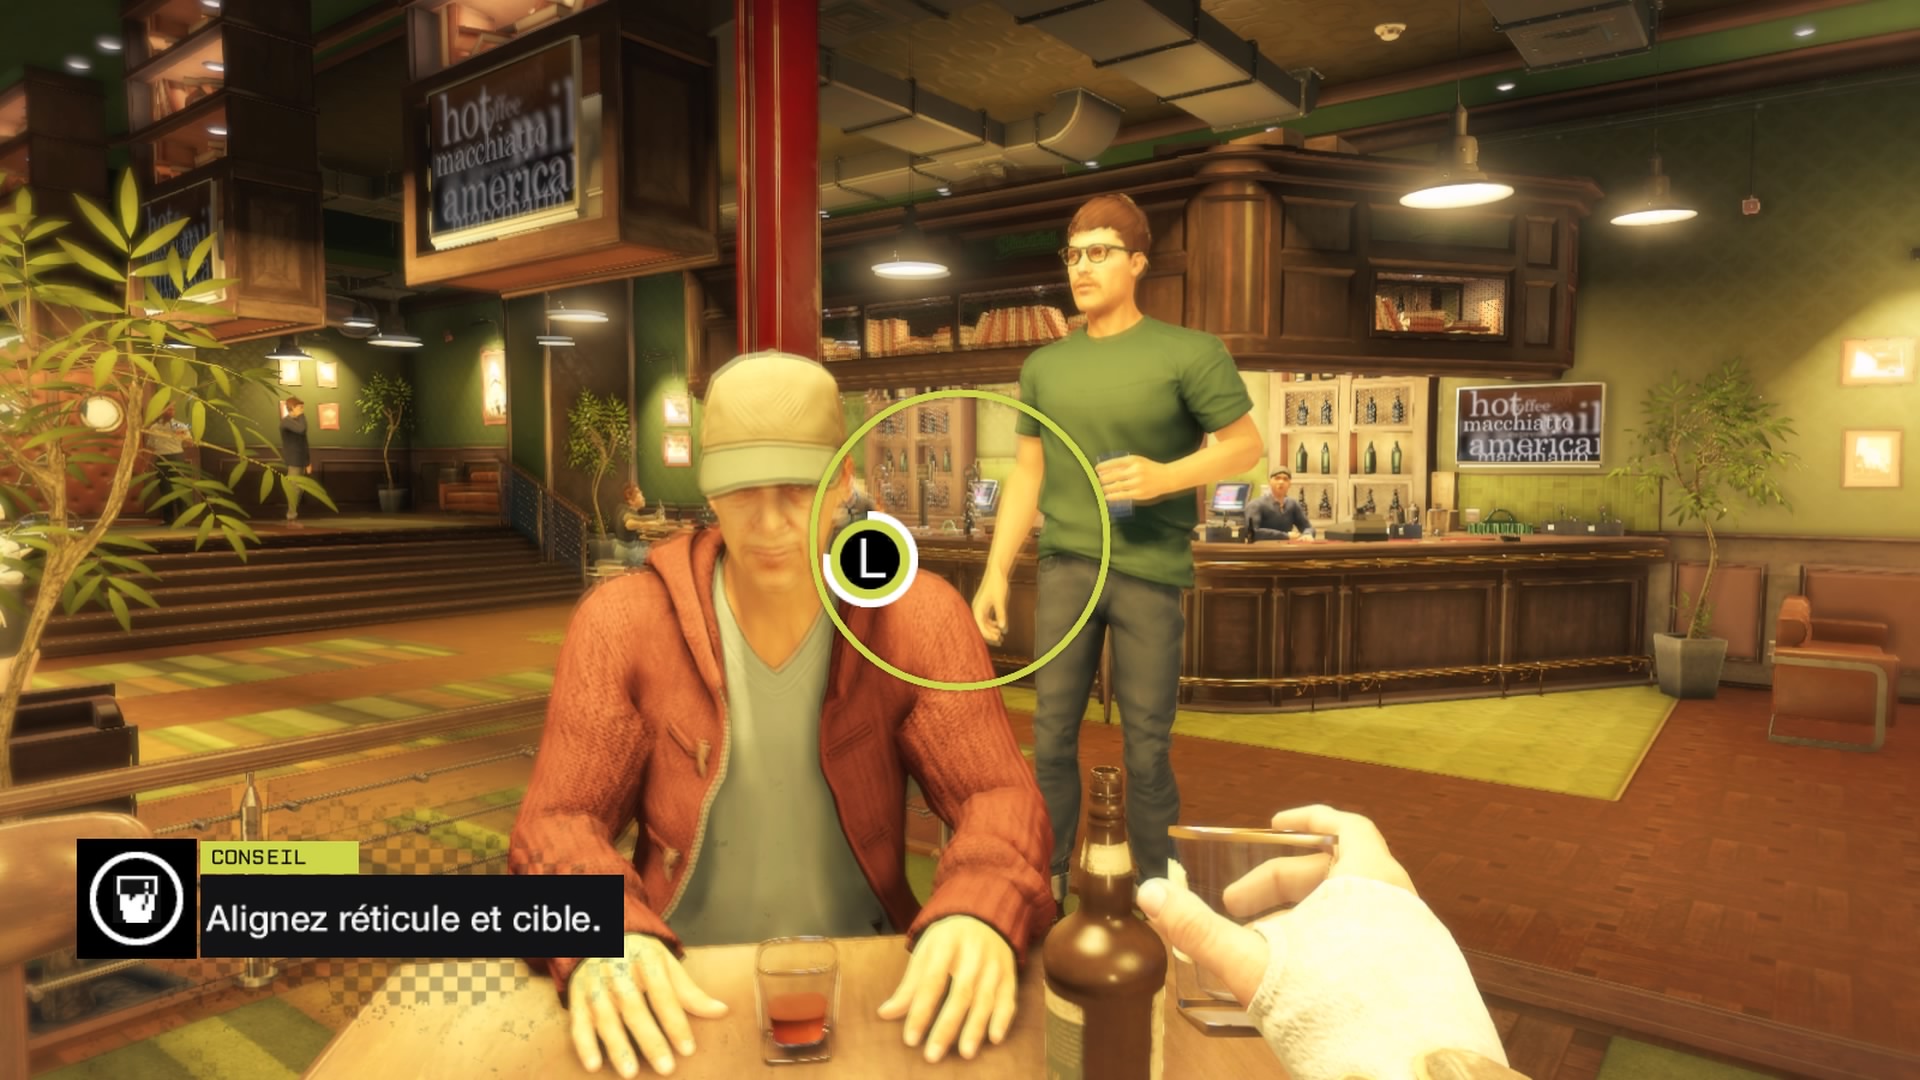 Watch Dogs buveur social